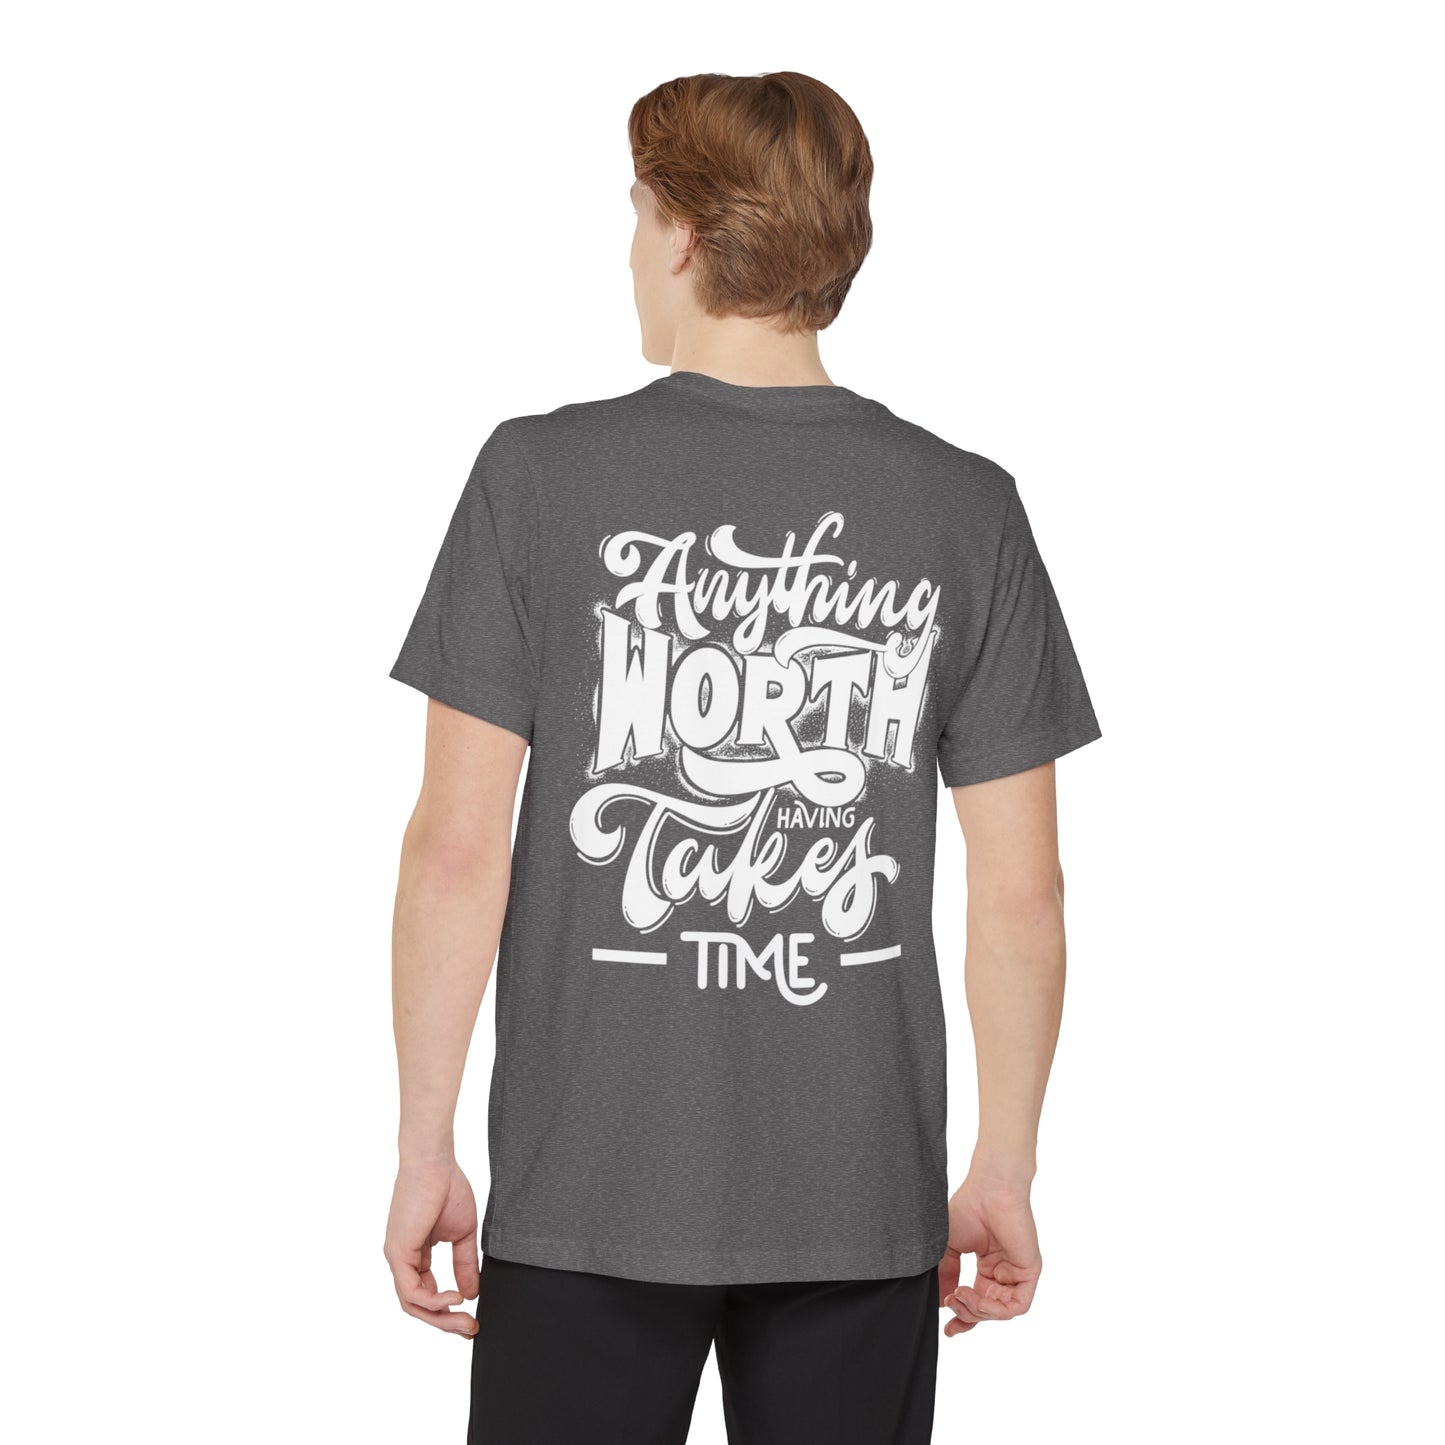 N.H. Inc. Know Your Worth T-shirt